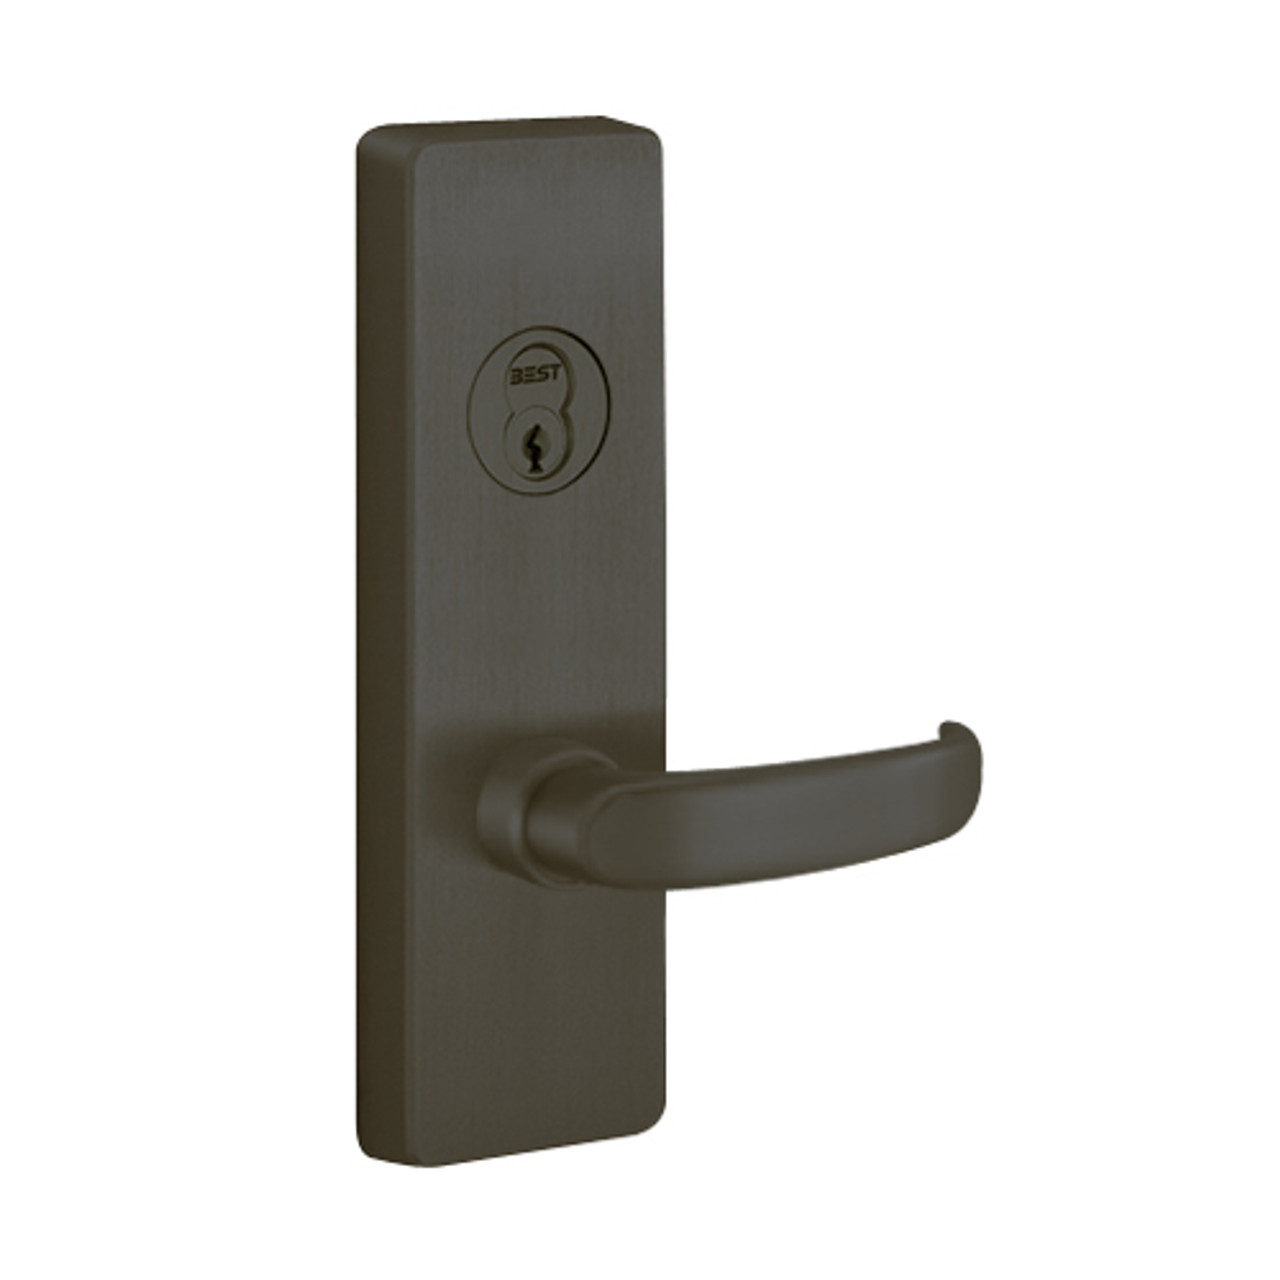 M4903D-613-LHR PHI Key Retracts Latchbolt Trim with D Lever Design for Apex and Olympian Series Exit Device in Oil Rubbed Bronze